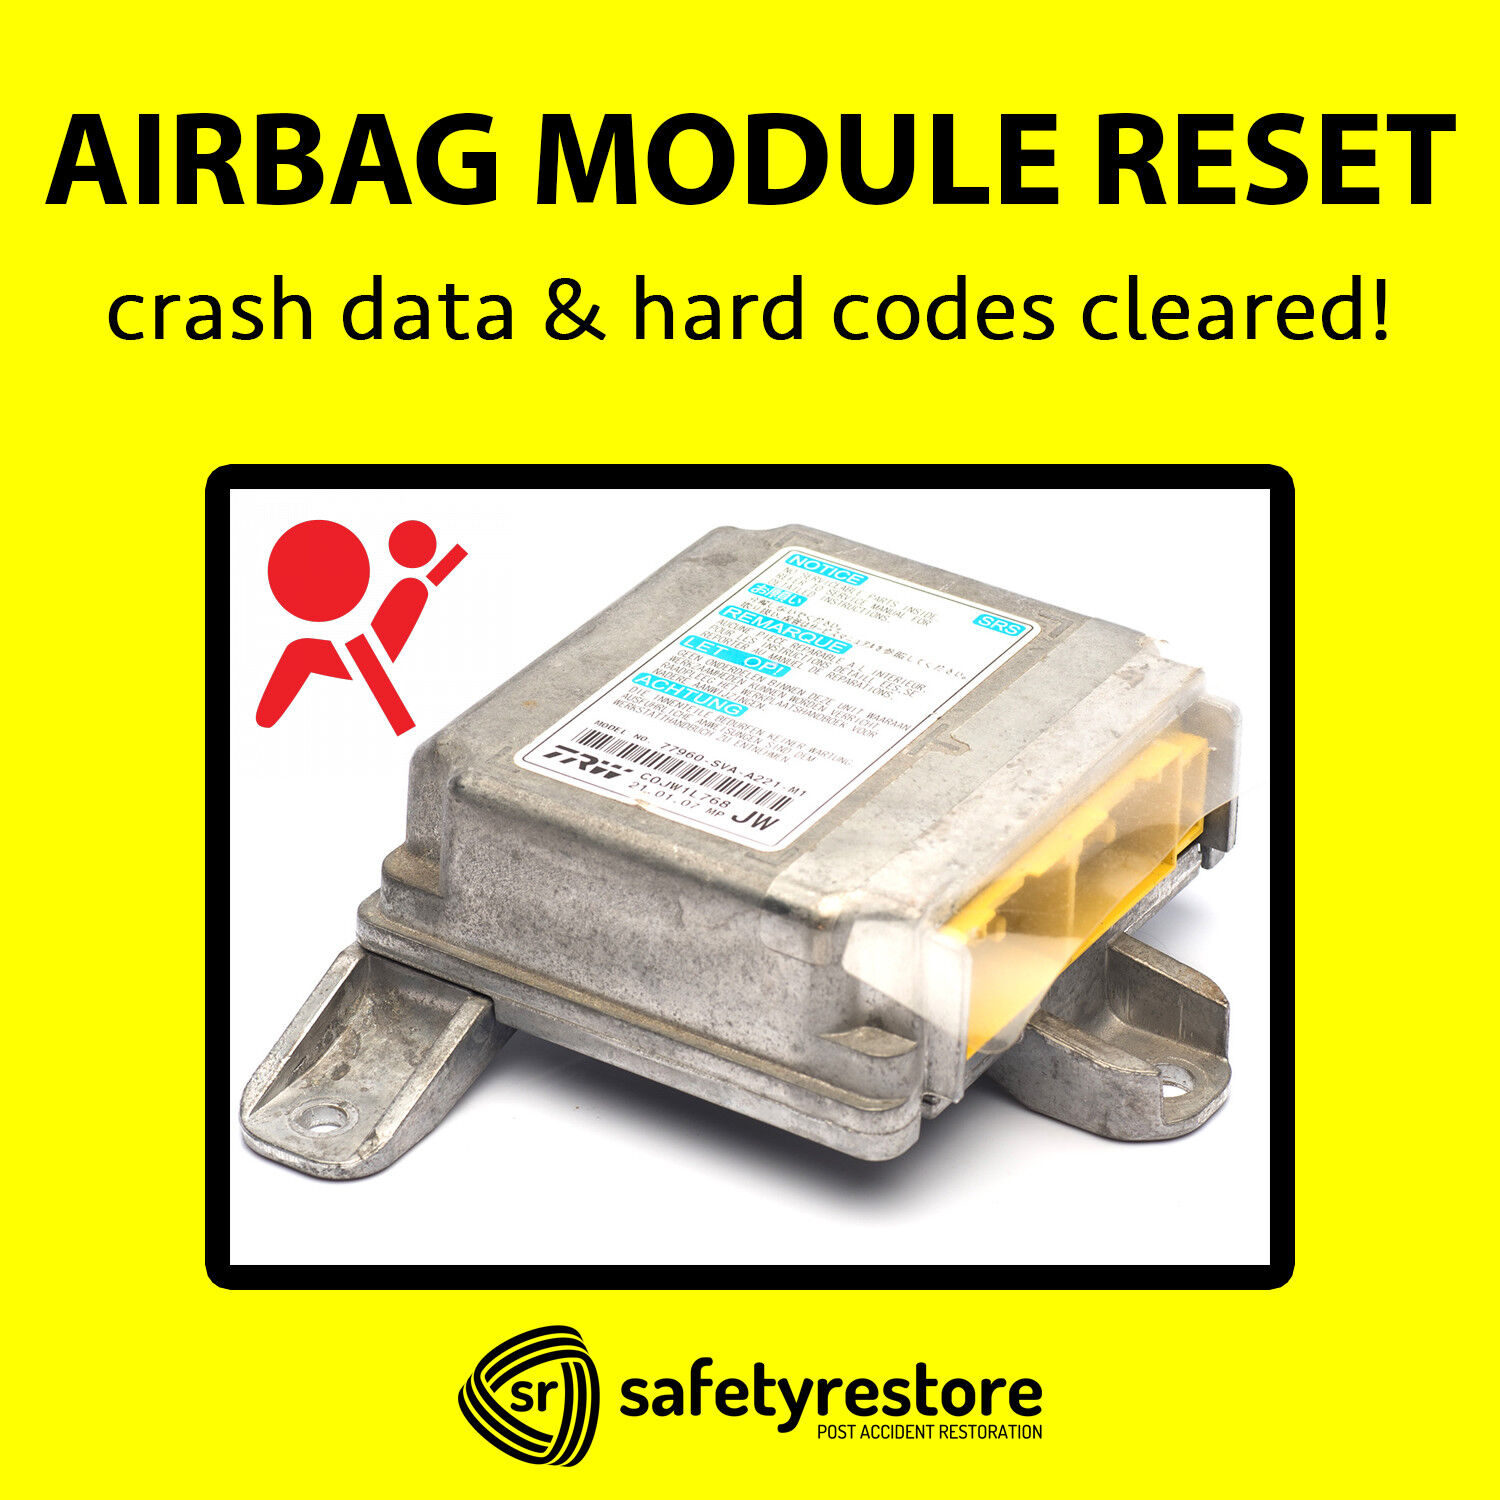 Fit SUBARU SRS AIRBAG MODULE RESET CRASH DATA CLEAN CLEAR AFTER ACCIDENT